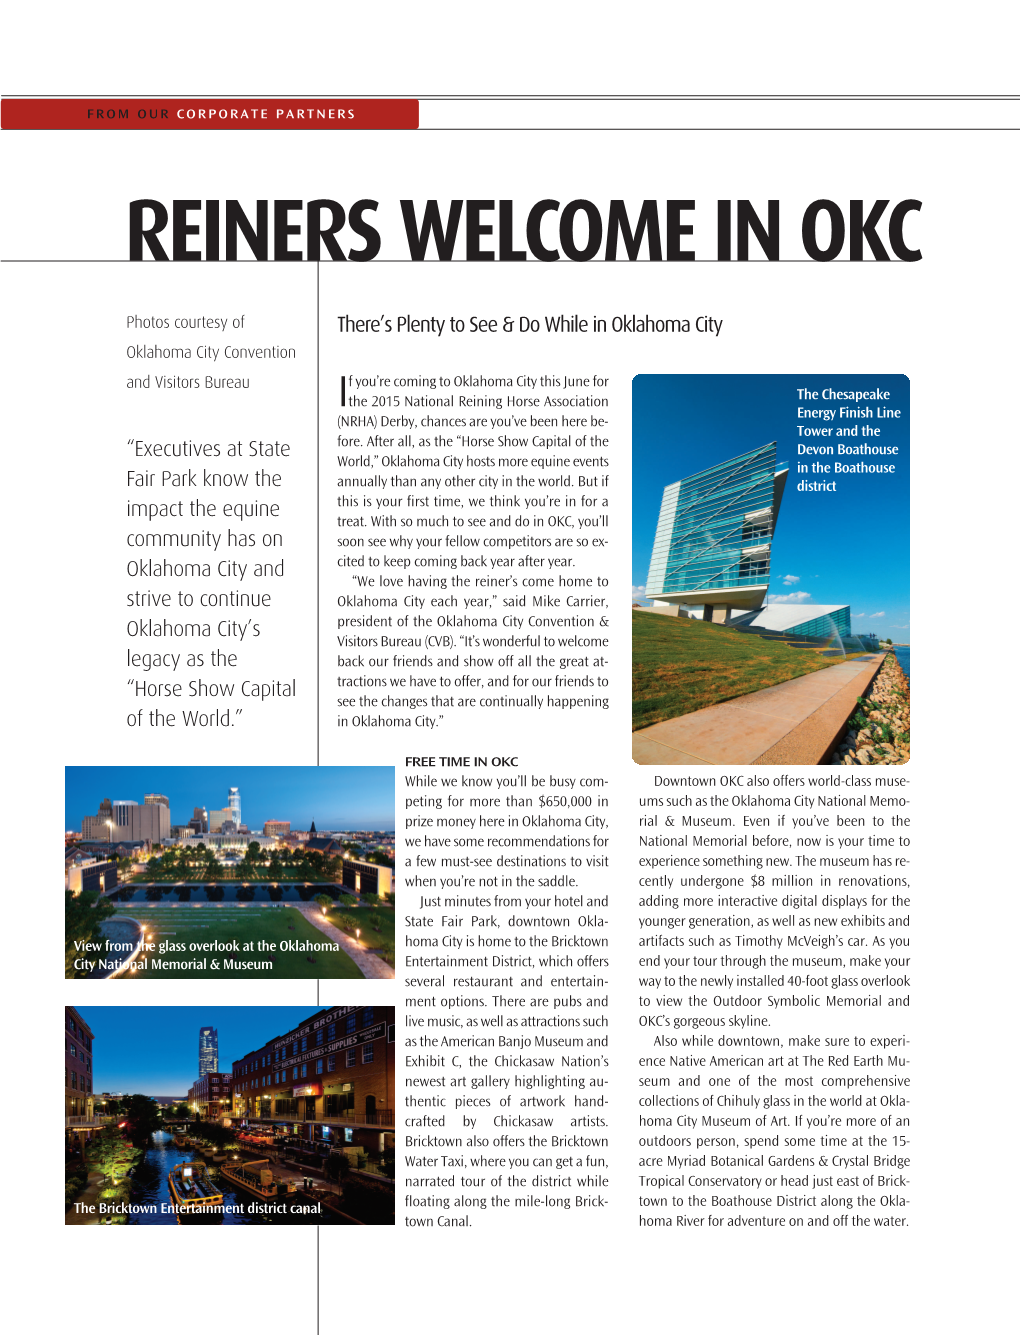 Reiners Welcome in Okc